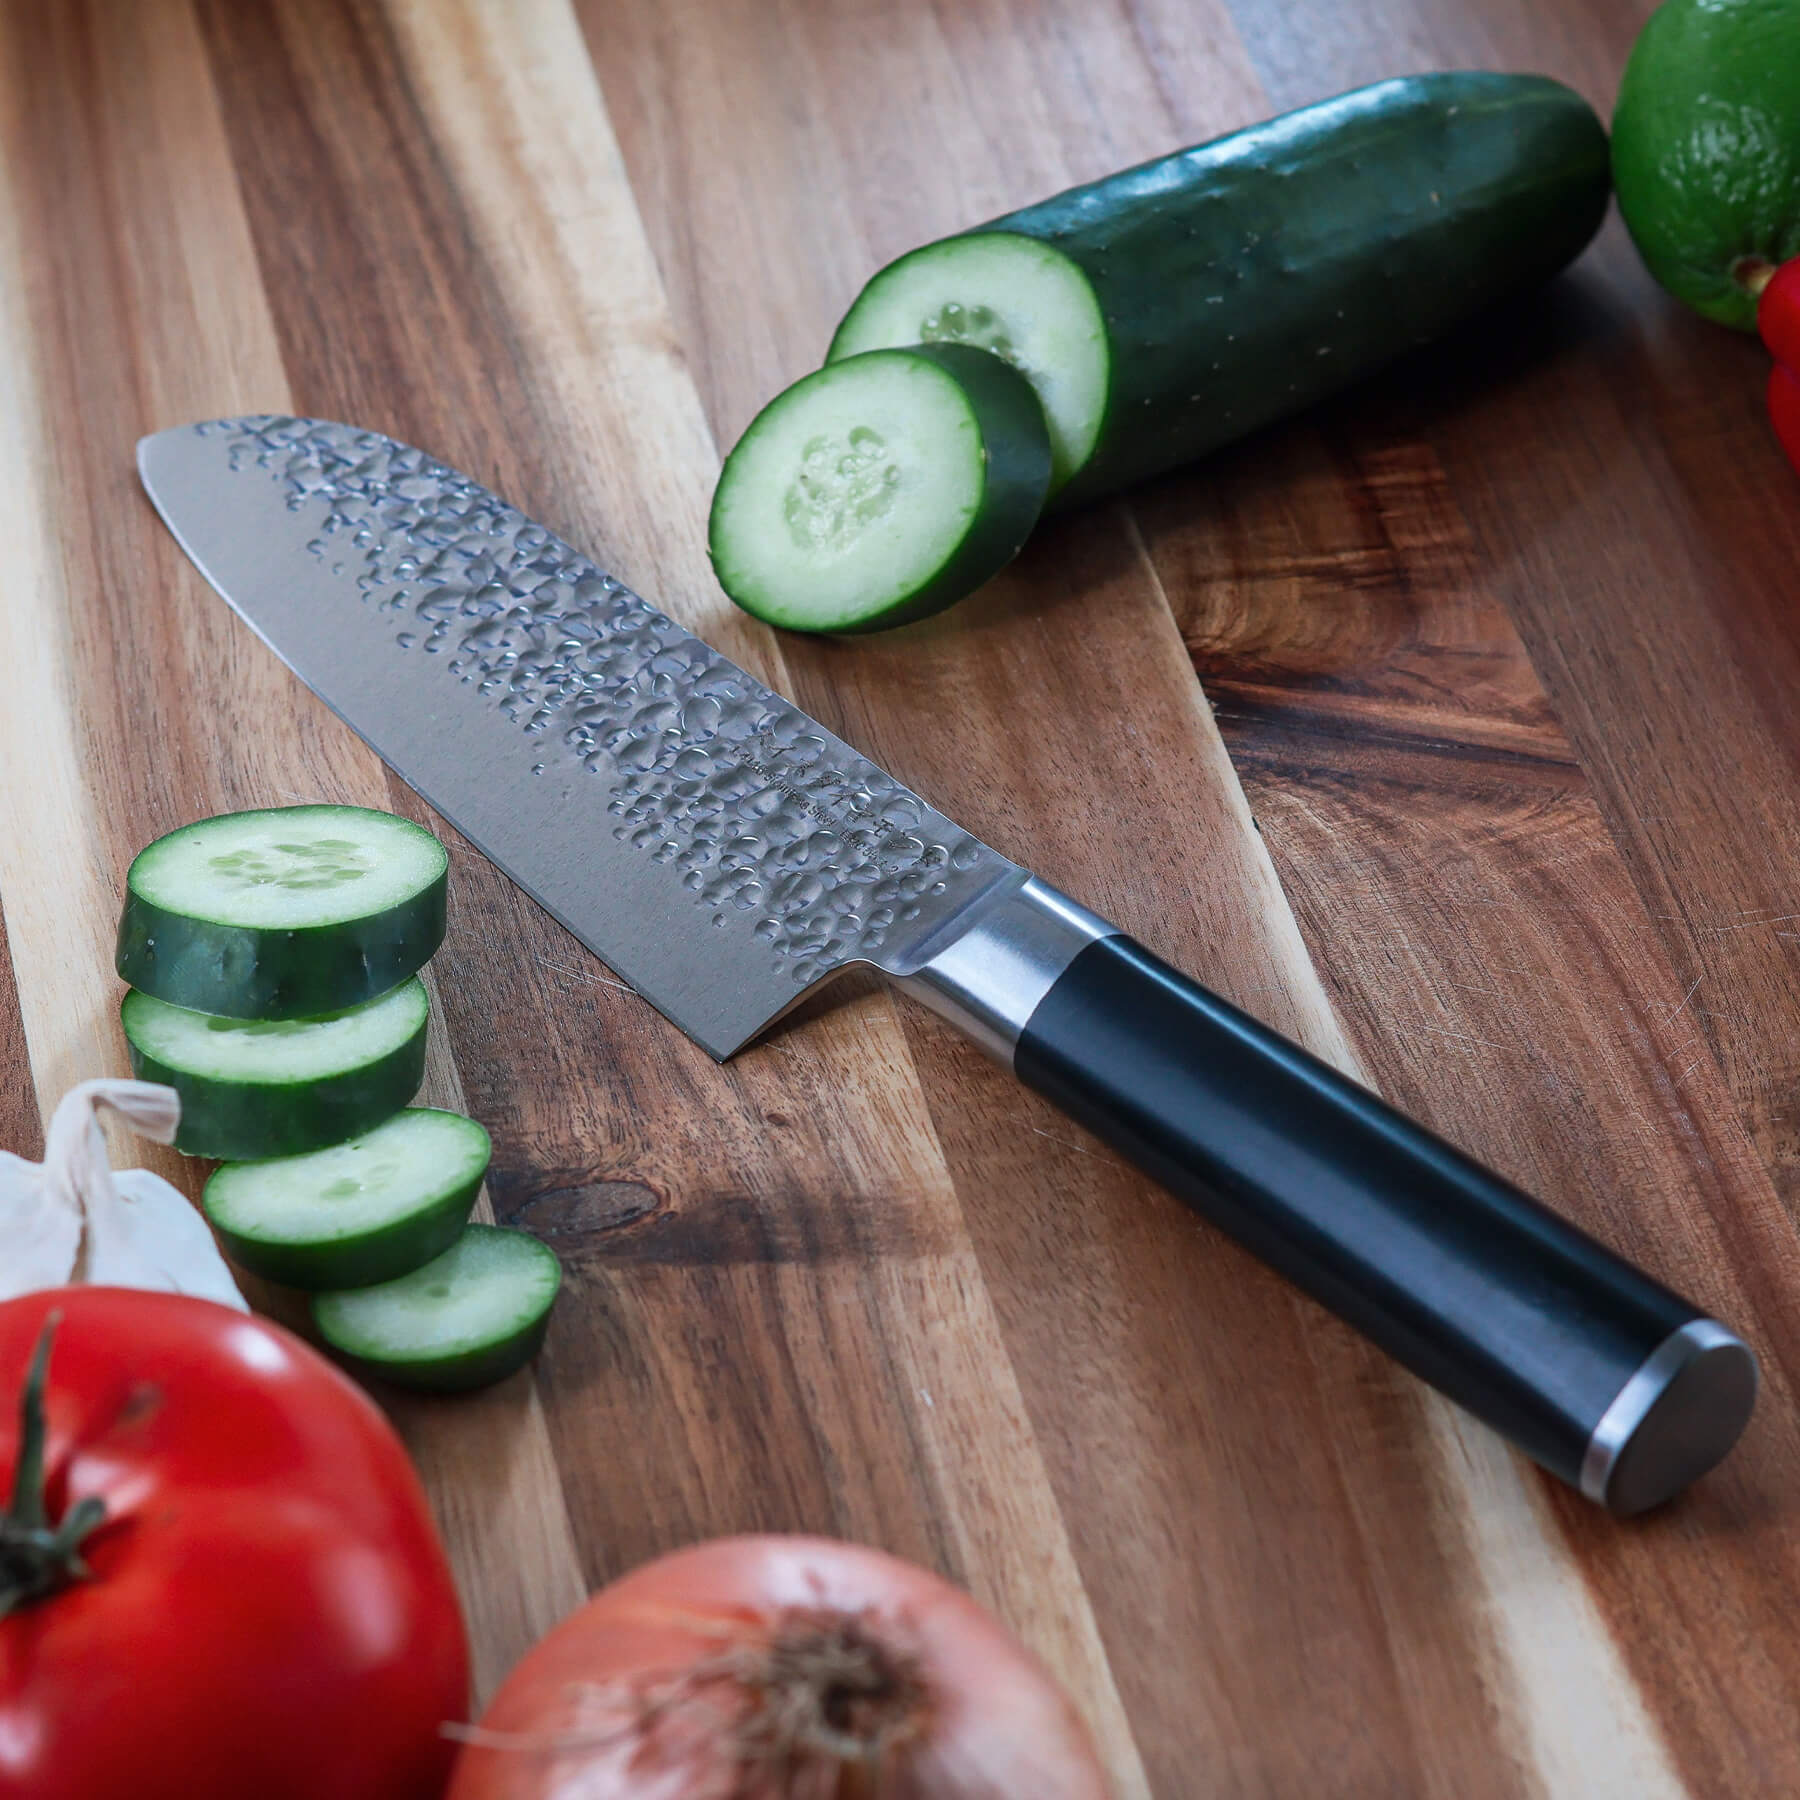 7" Hammered Santoku Knife on cutting board with sliced cucumbers